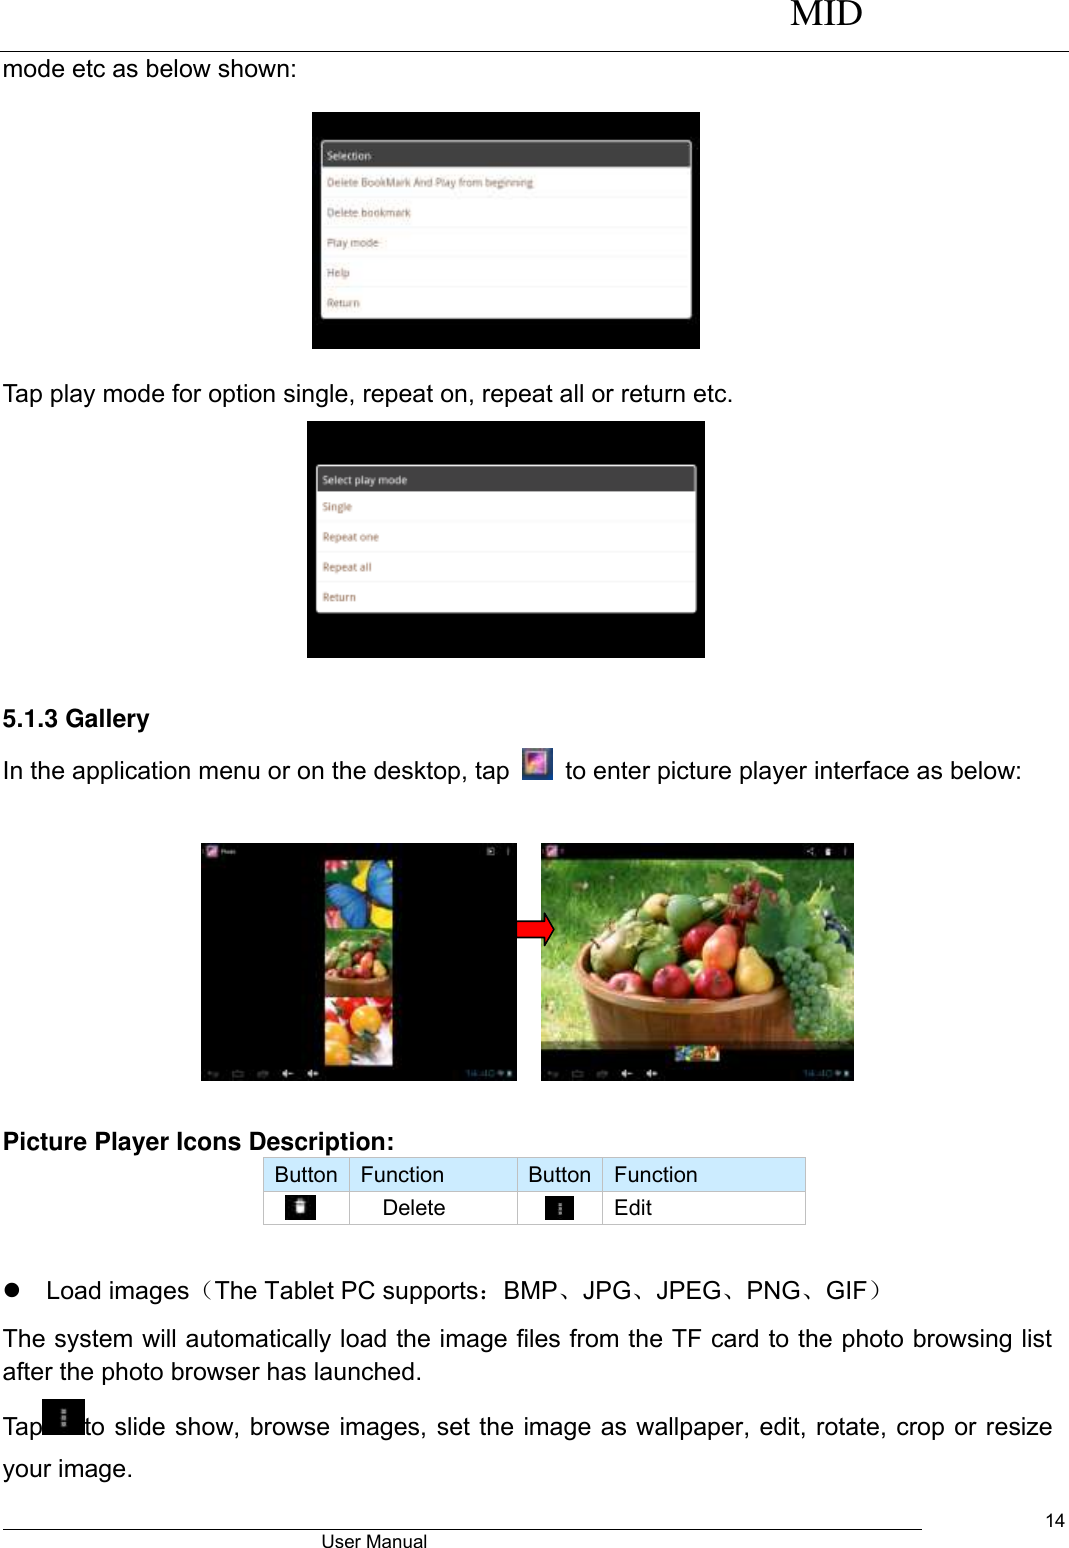      MID                                        User Manual     14 mode etc as below shown:    Tap play mode for option single, repeat on, repeat all or return etc.   5.1.3 Gallery In the application menu or on the desktop, tap    to enter picture player interface as below:     Picture Player Icons Description:     Button Function Button Function      Delete  Edit    Load images（The Tablet PC supports：BMP、JPG、JPEG、PNG、GIF） The system will automatically load the image files from the TF card to the photo browsing list after the photo browser has launched. Tap to slide show, browse images, set the image as wallpaper, edit, rotate, crop or resize your image. 